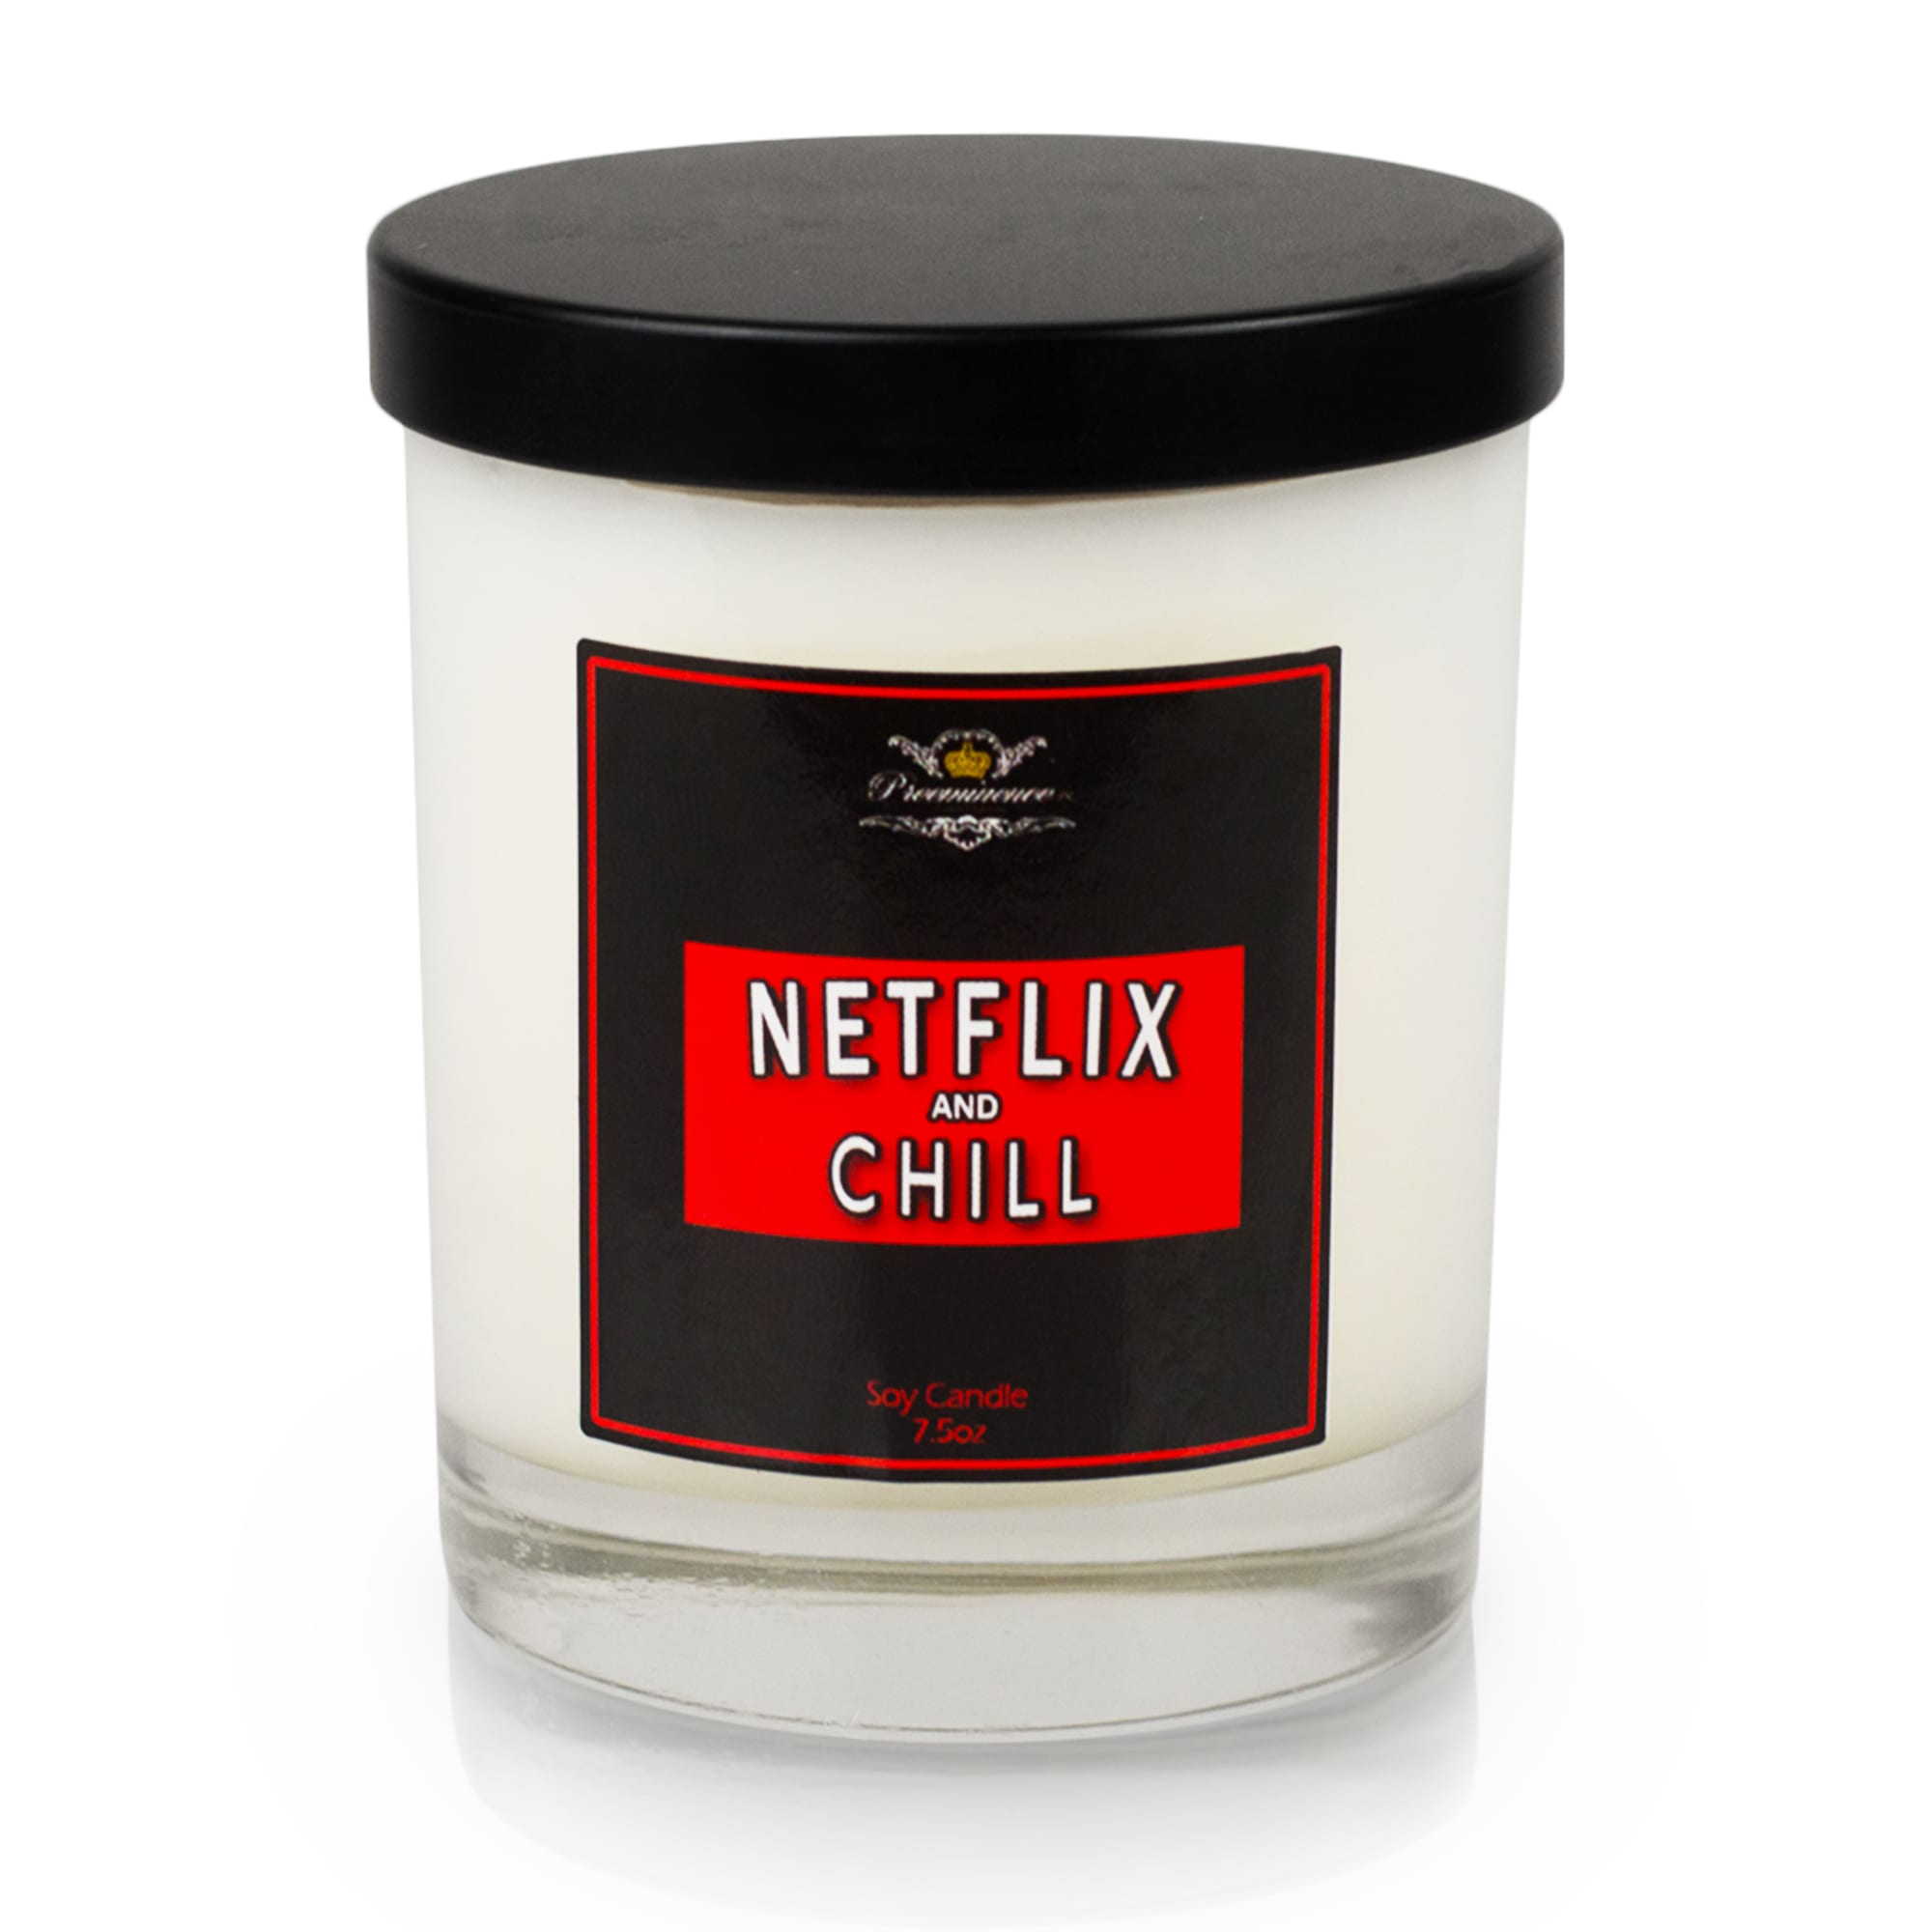 Netflix and Chill Soy Candle Home Fragrance Preeminence